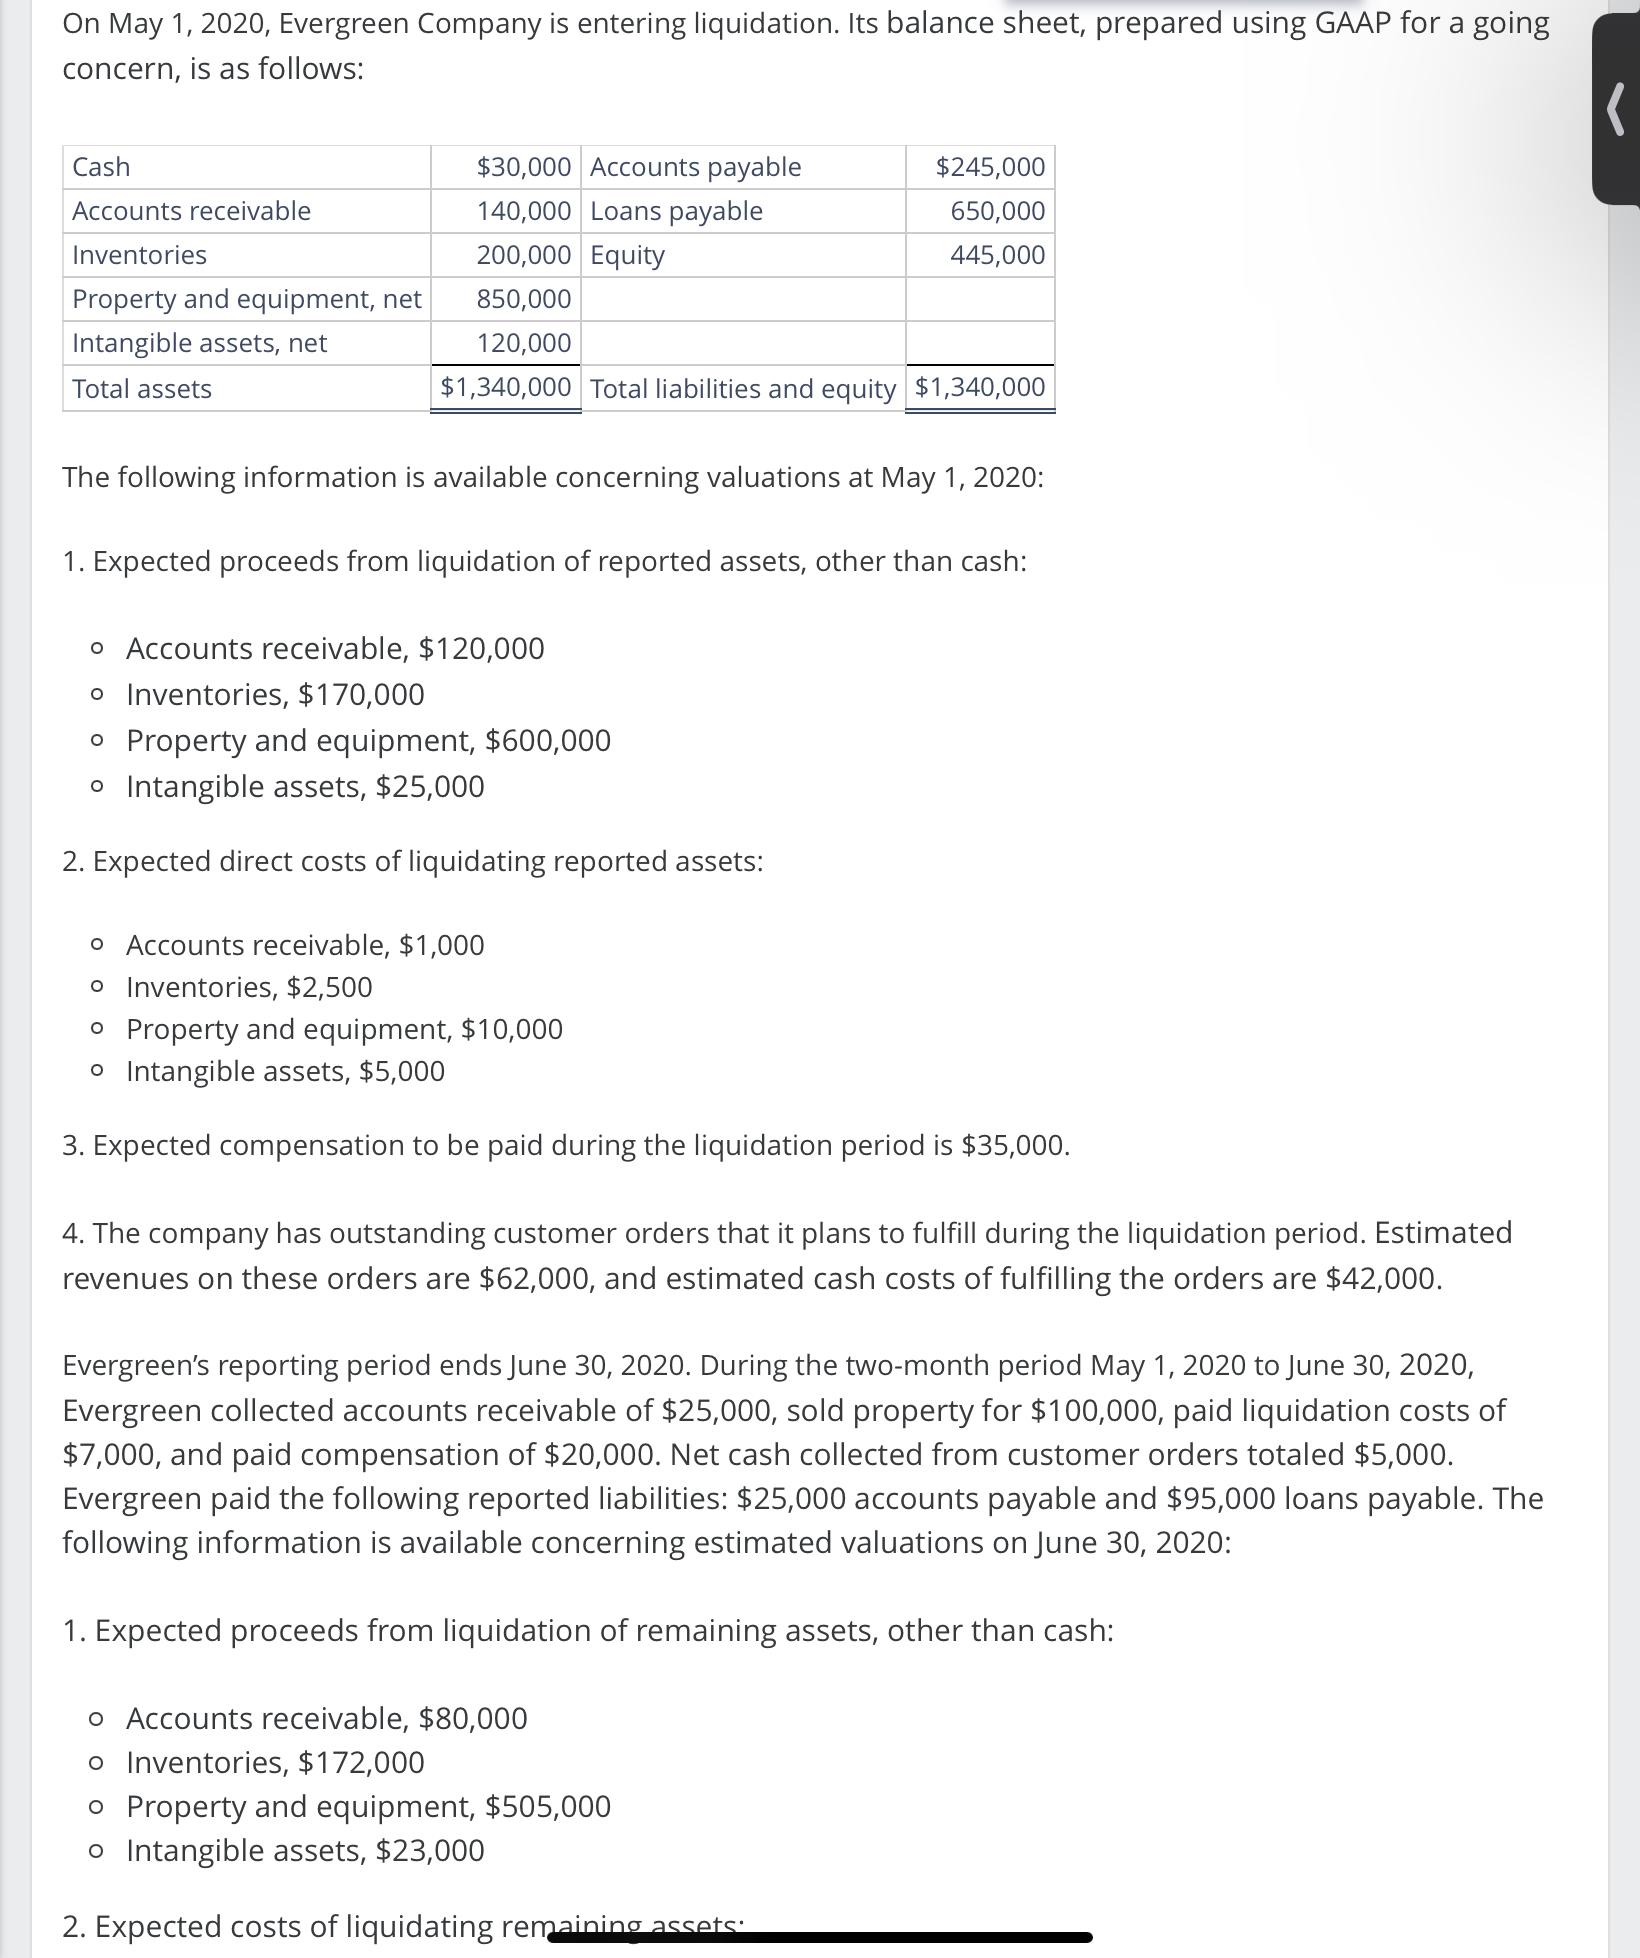 On May 1, 2020, Evergreen Company is entering liquidation. Its balance sheet, prepared using GAAP for a going